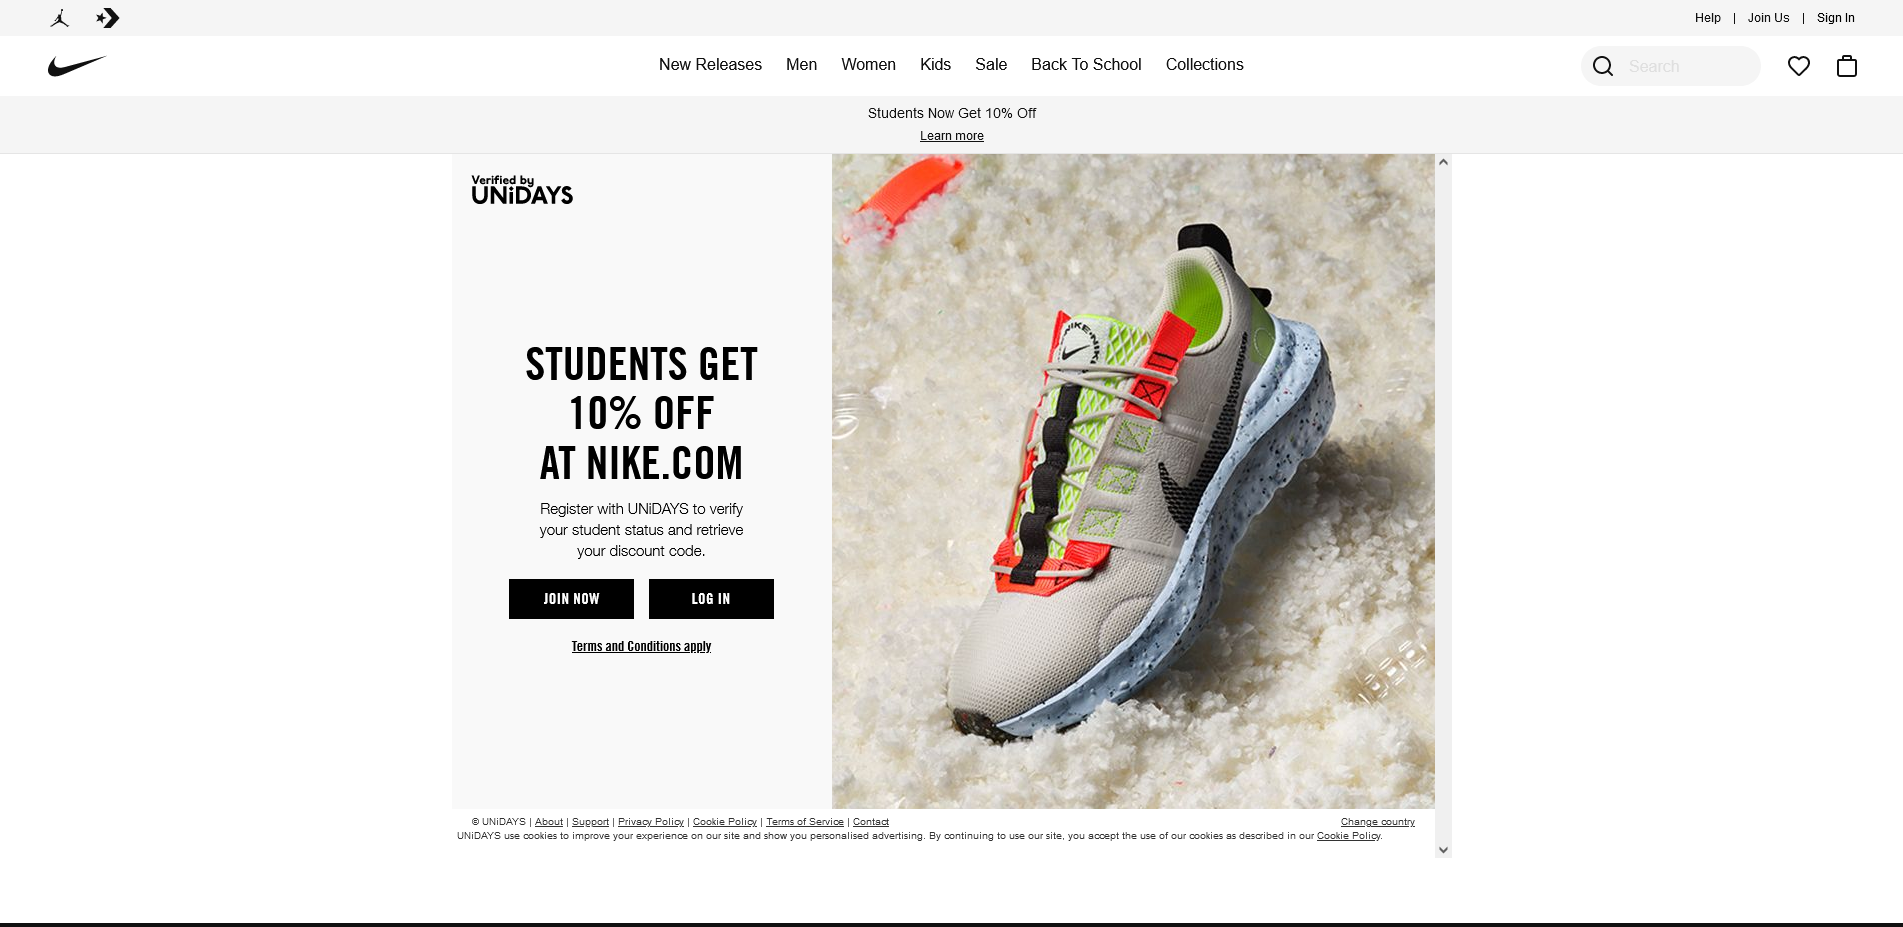 Student Discount Offer on Nike.com